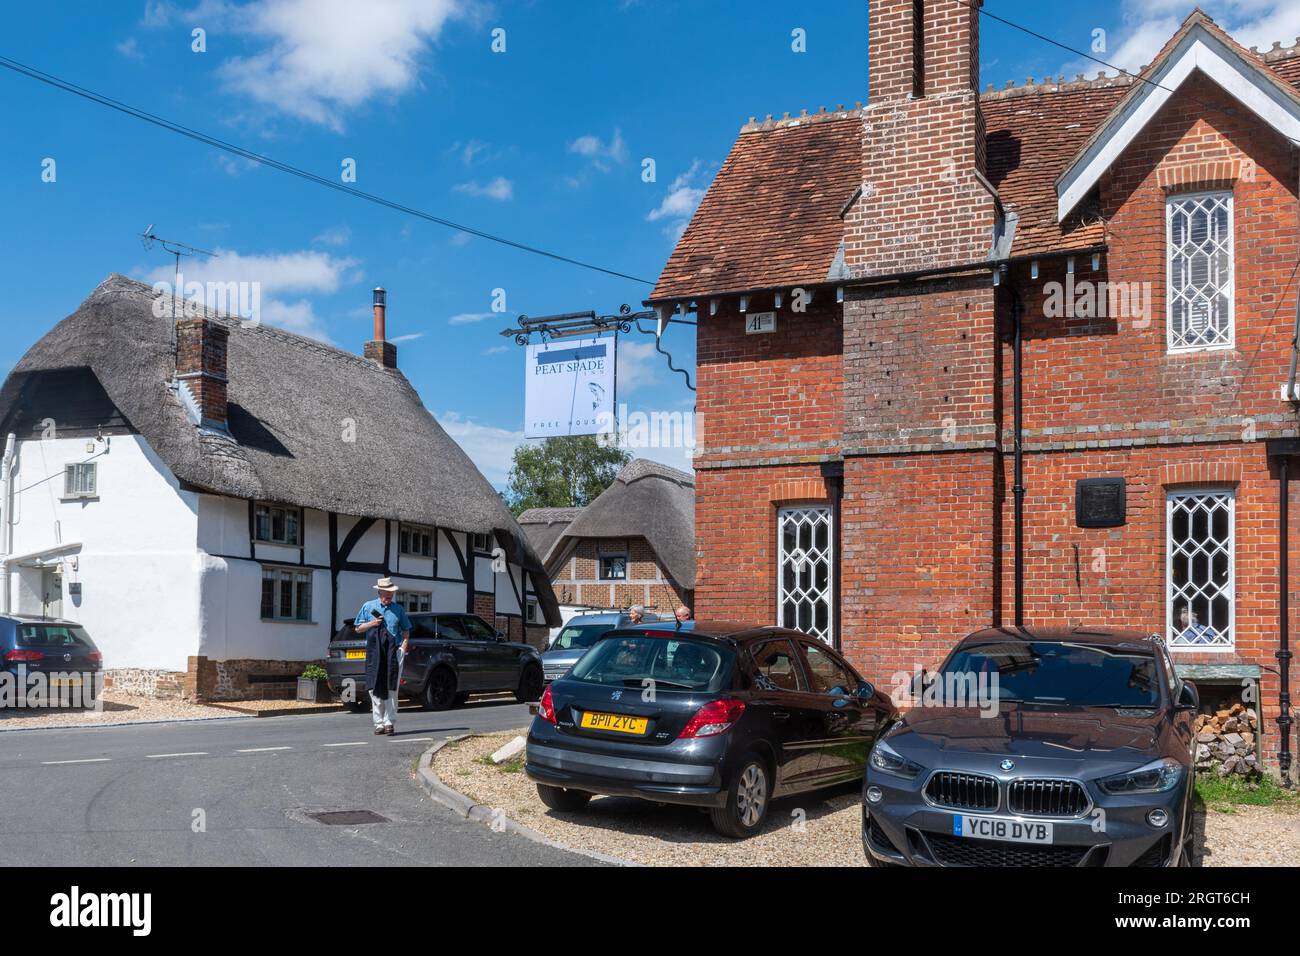 Longstock village centre with the local pub, The Peat Spade Inn,  and pretty thatched cottages, Hampshire, England, UK Stock Photo